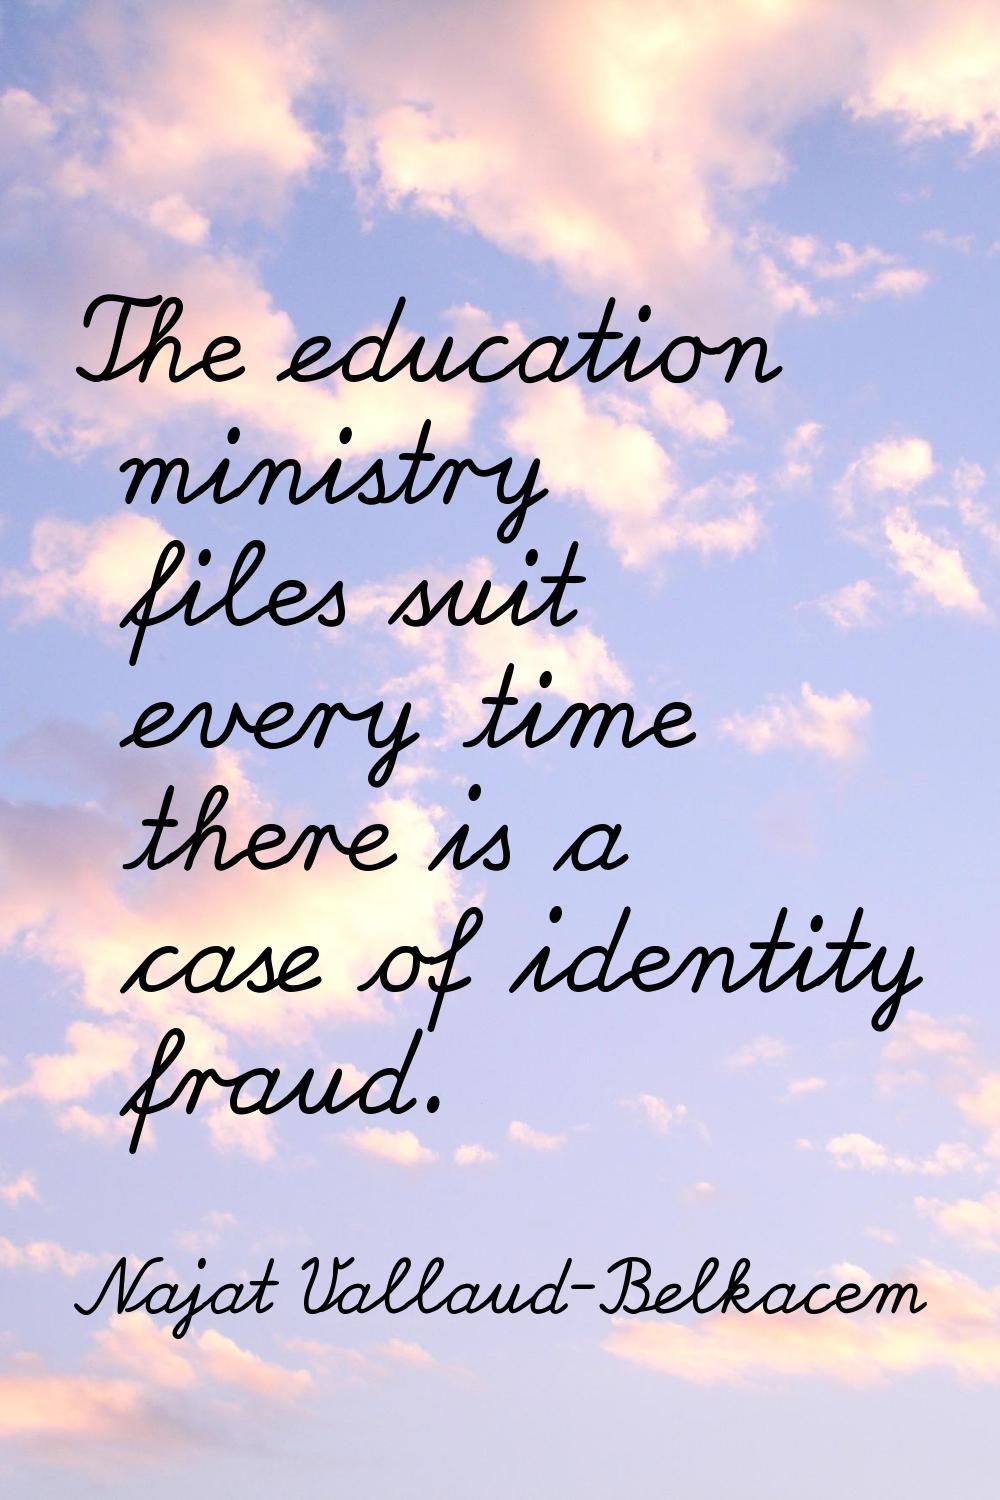 The education ministry files suit every time there is a case of identity fraud.